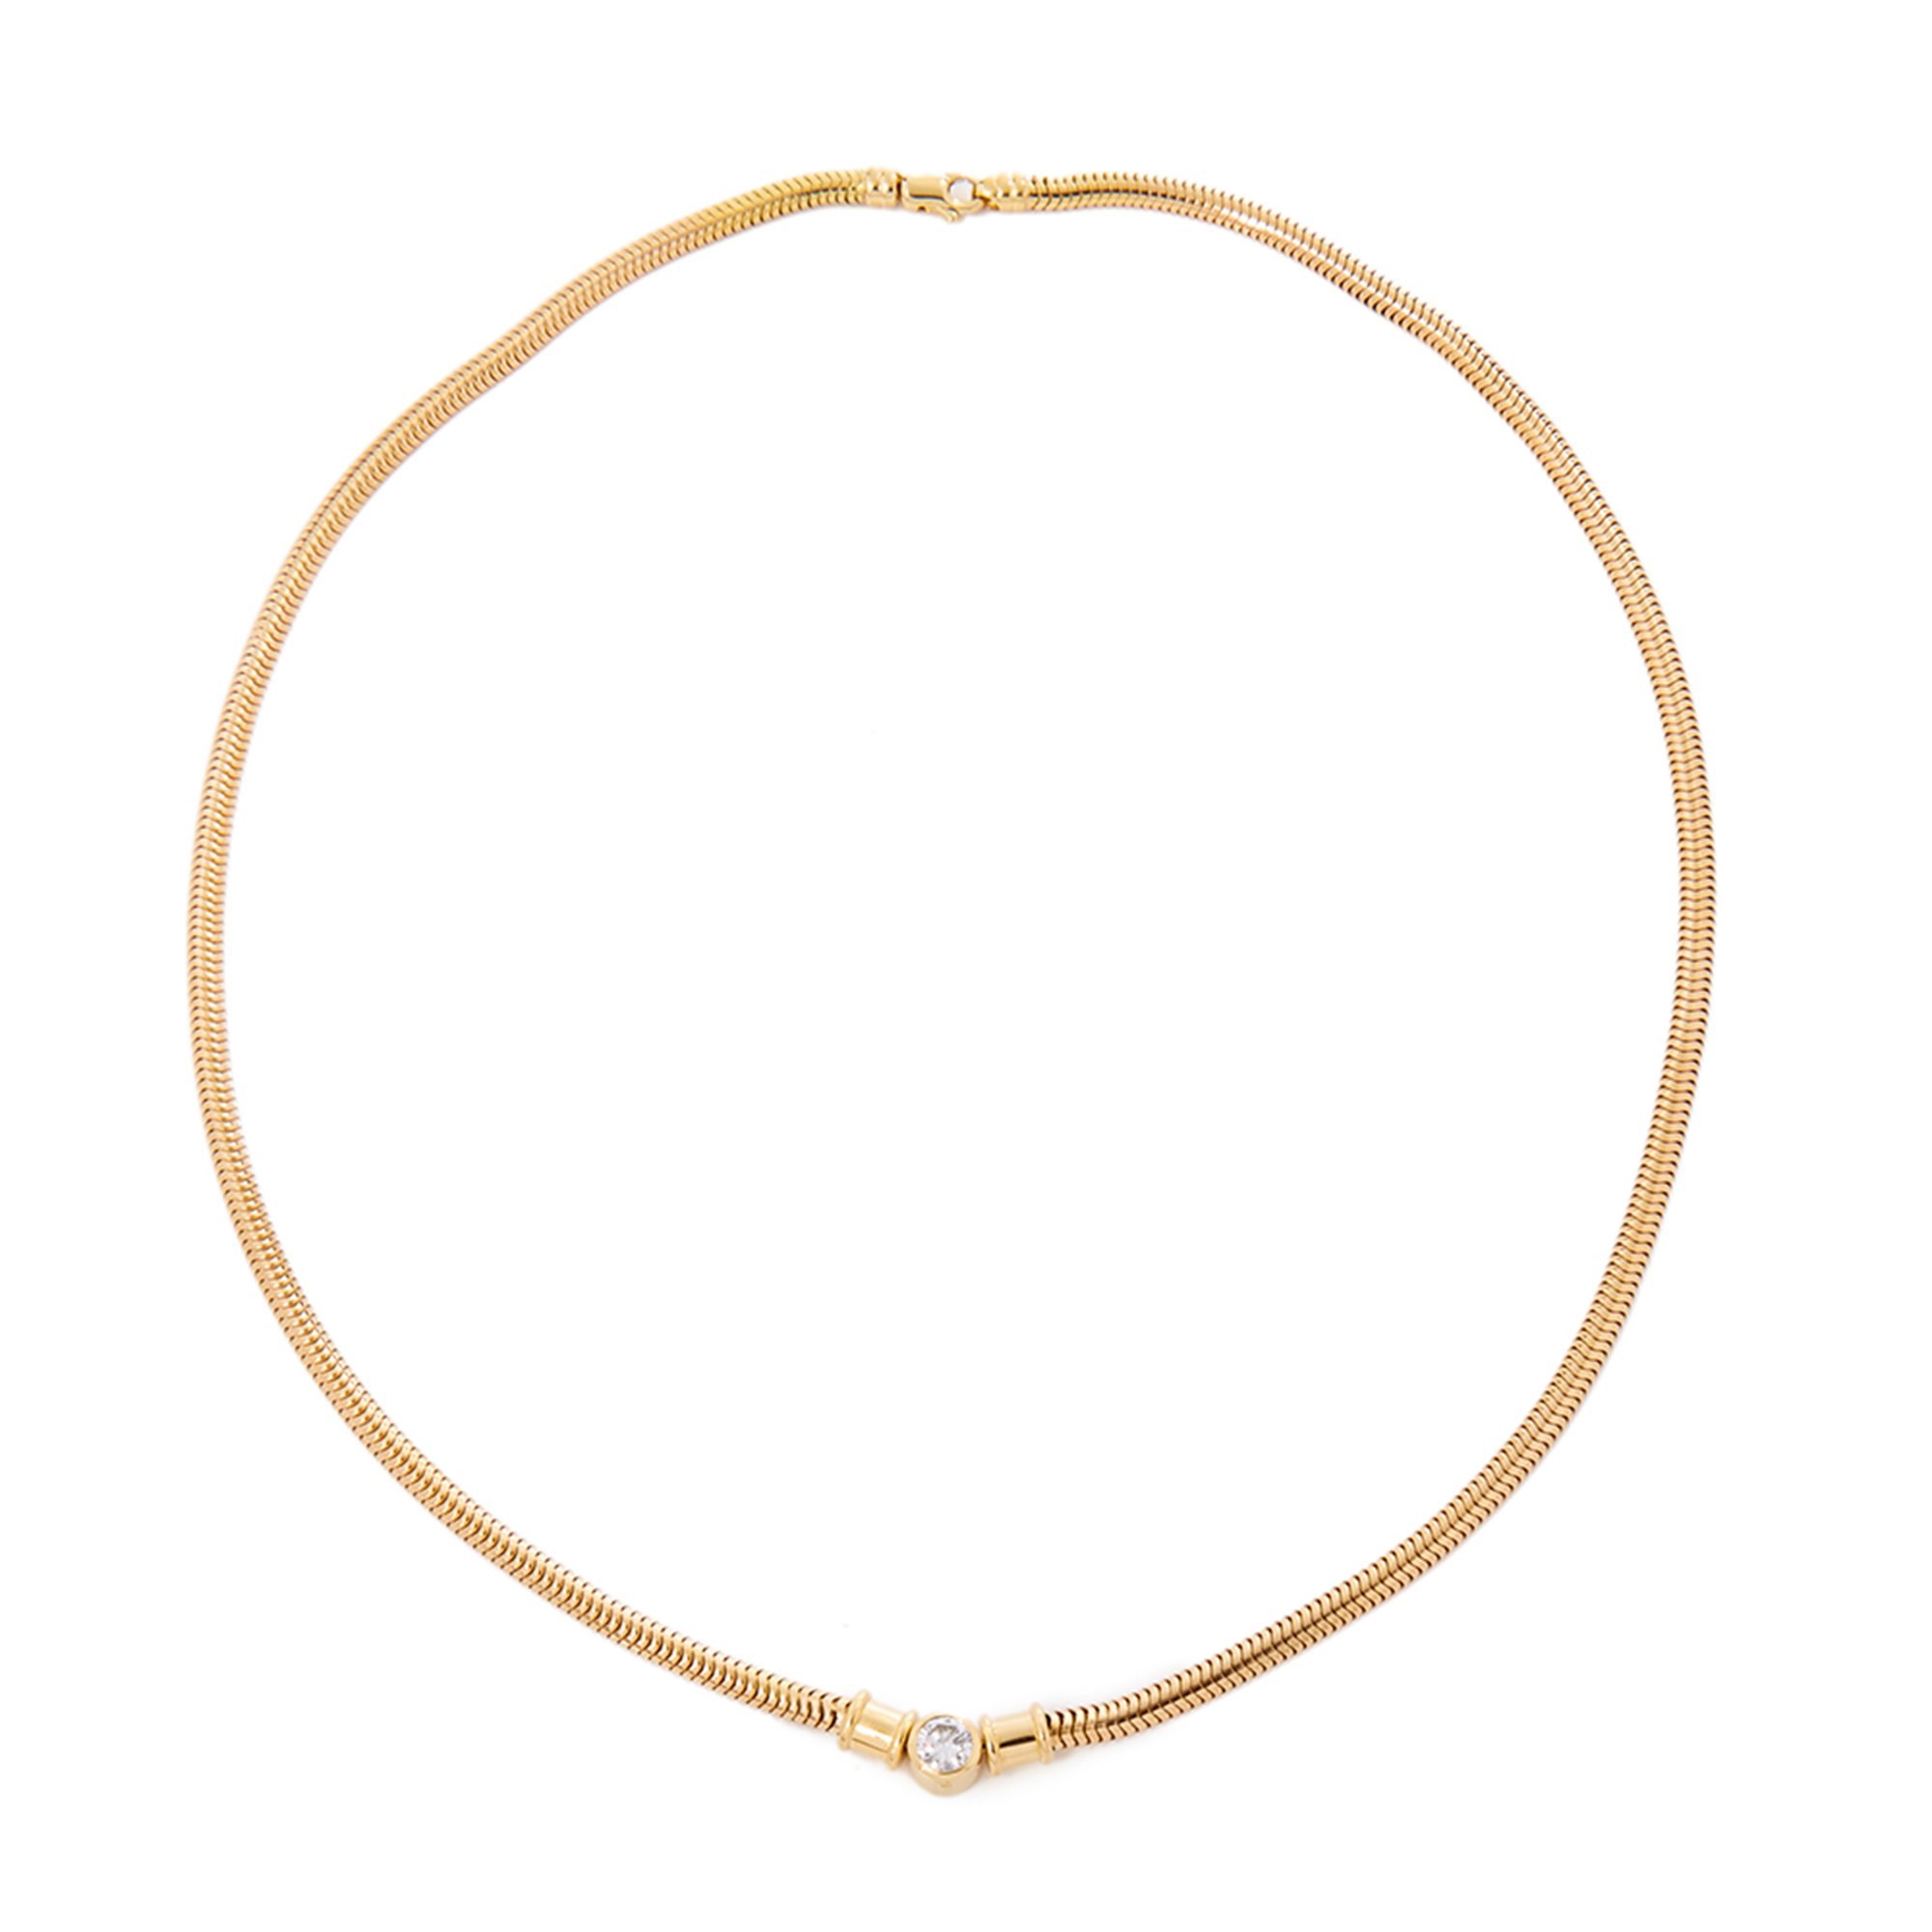 Theo Fennell 18k Yellow Gold Solitaire Diamond Necklace